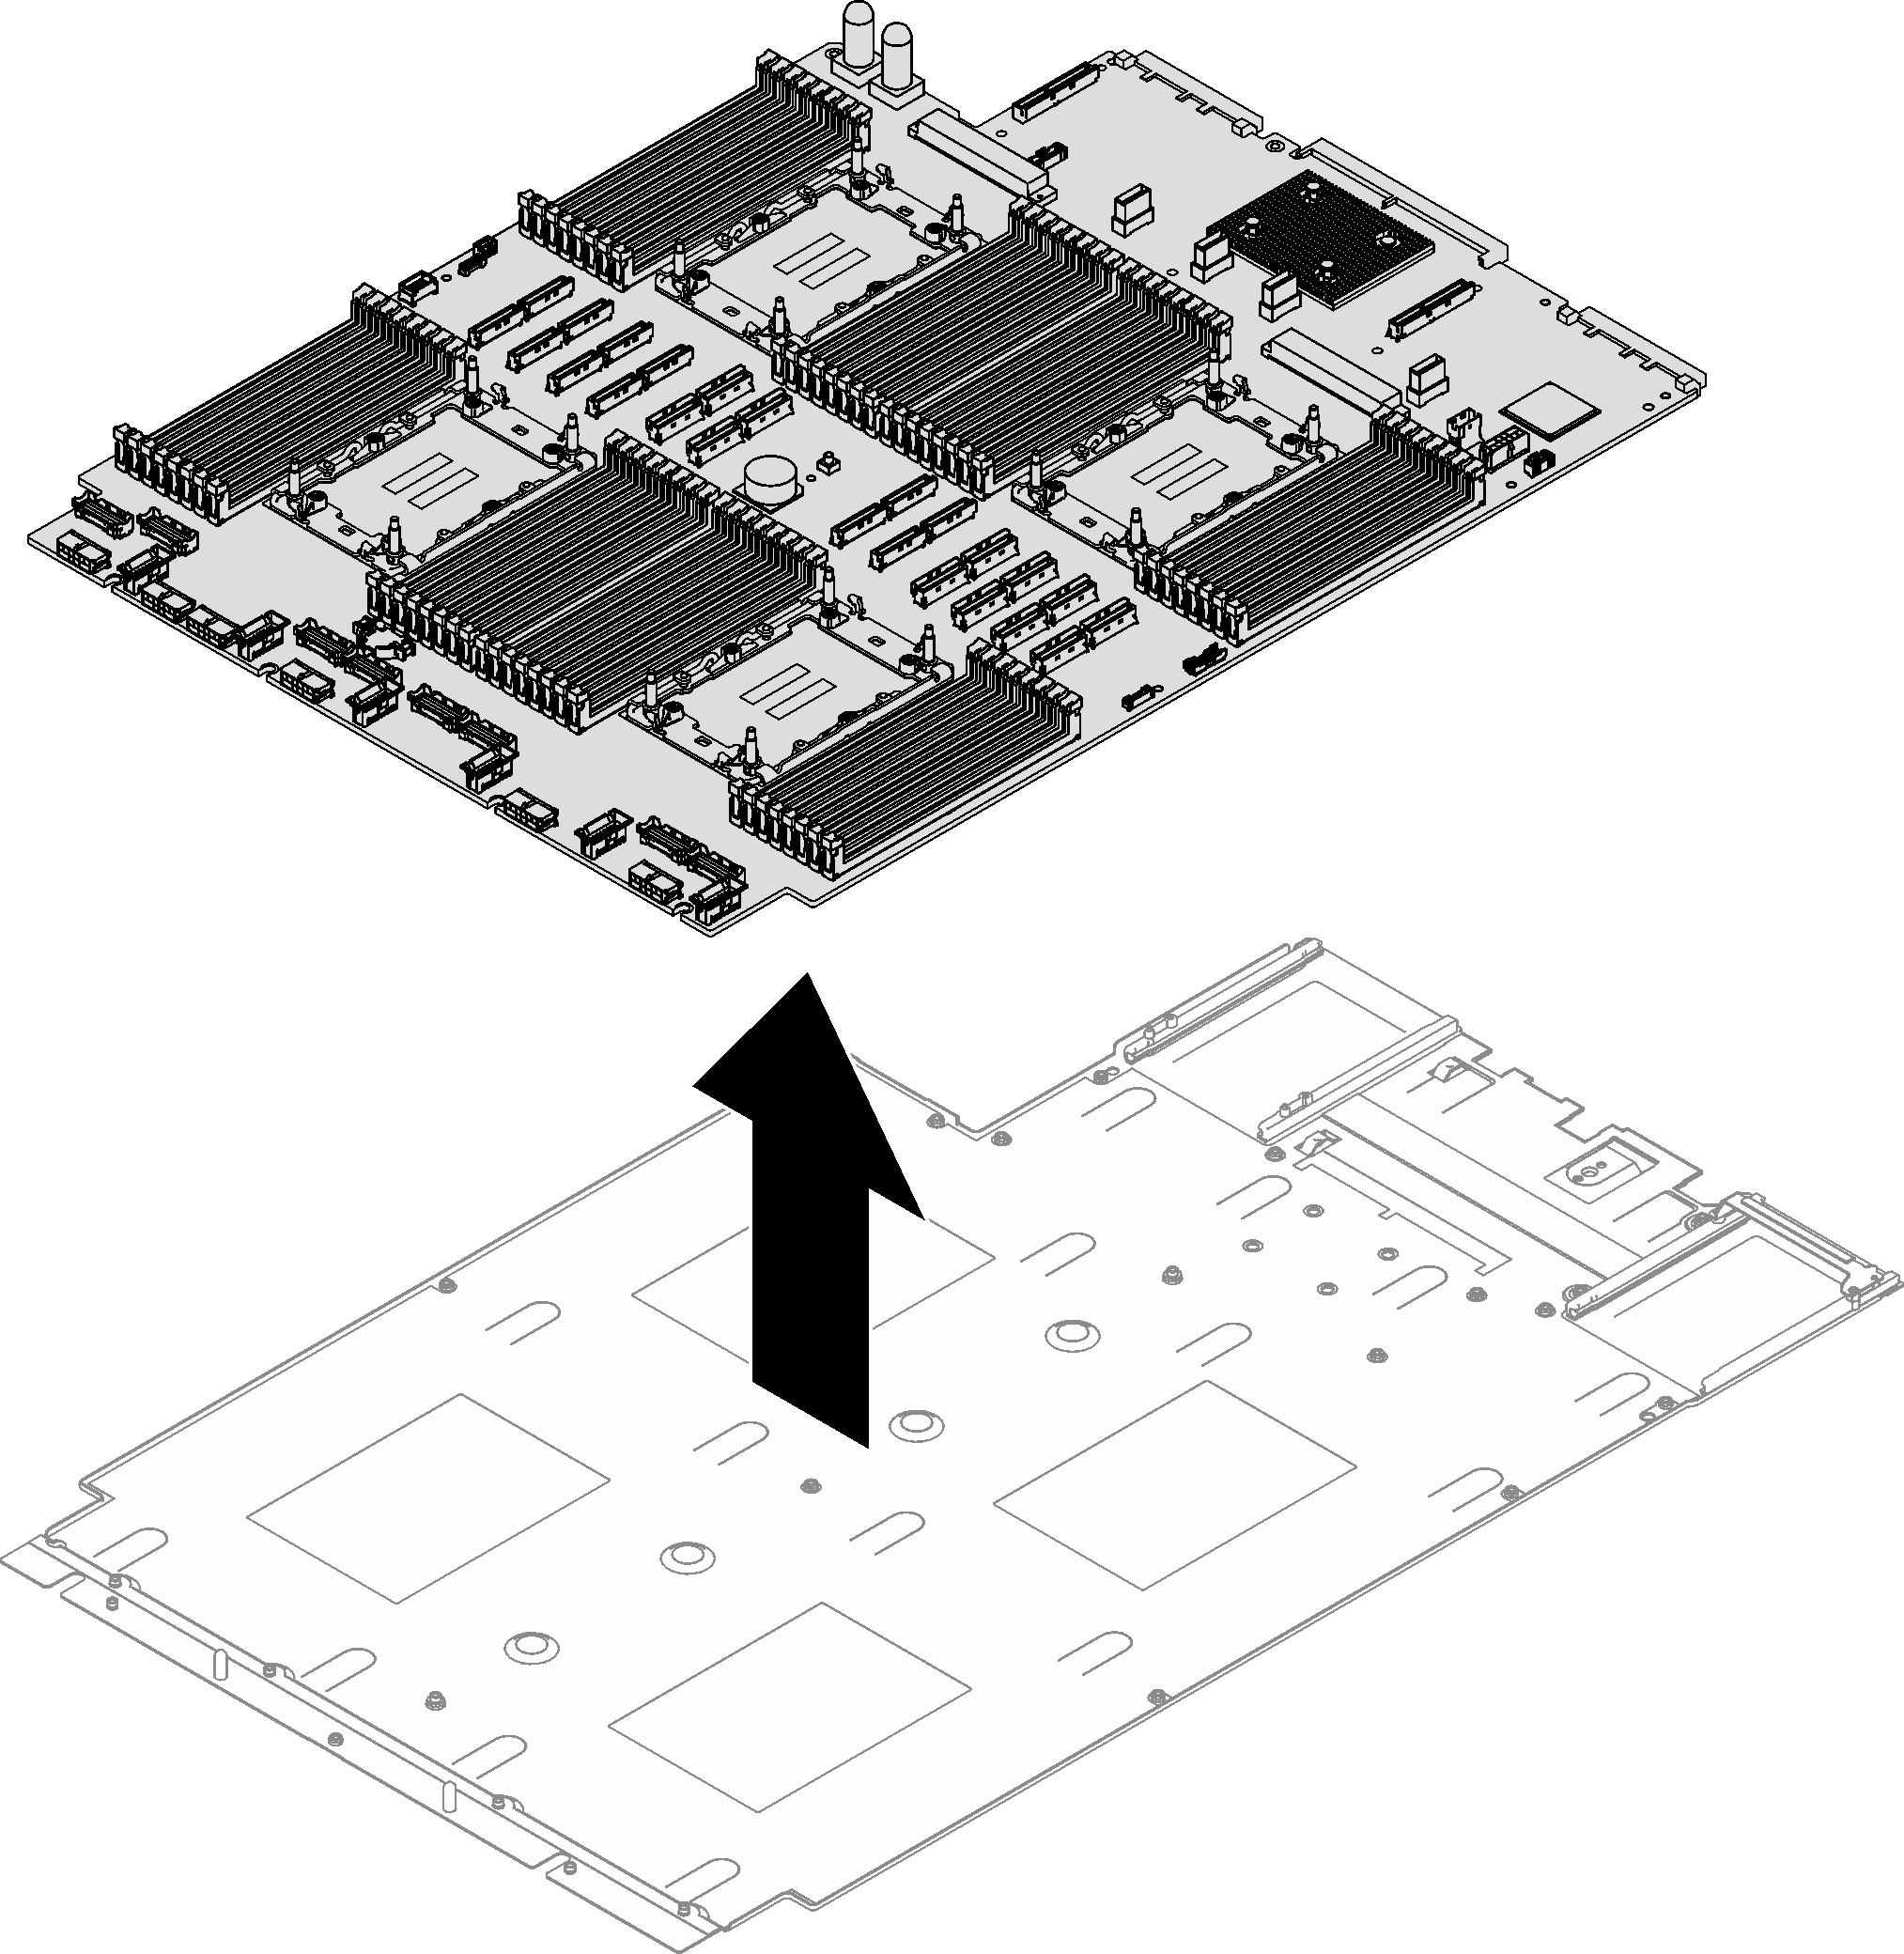 Processor board disassembly